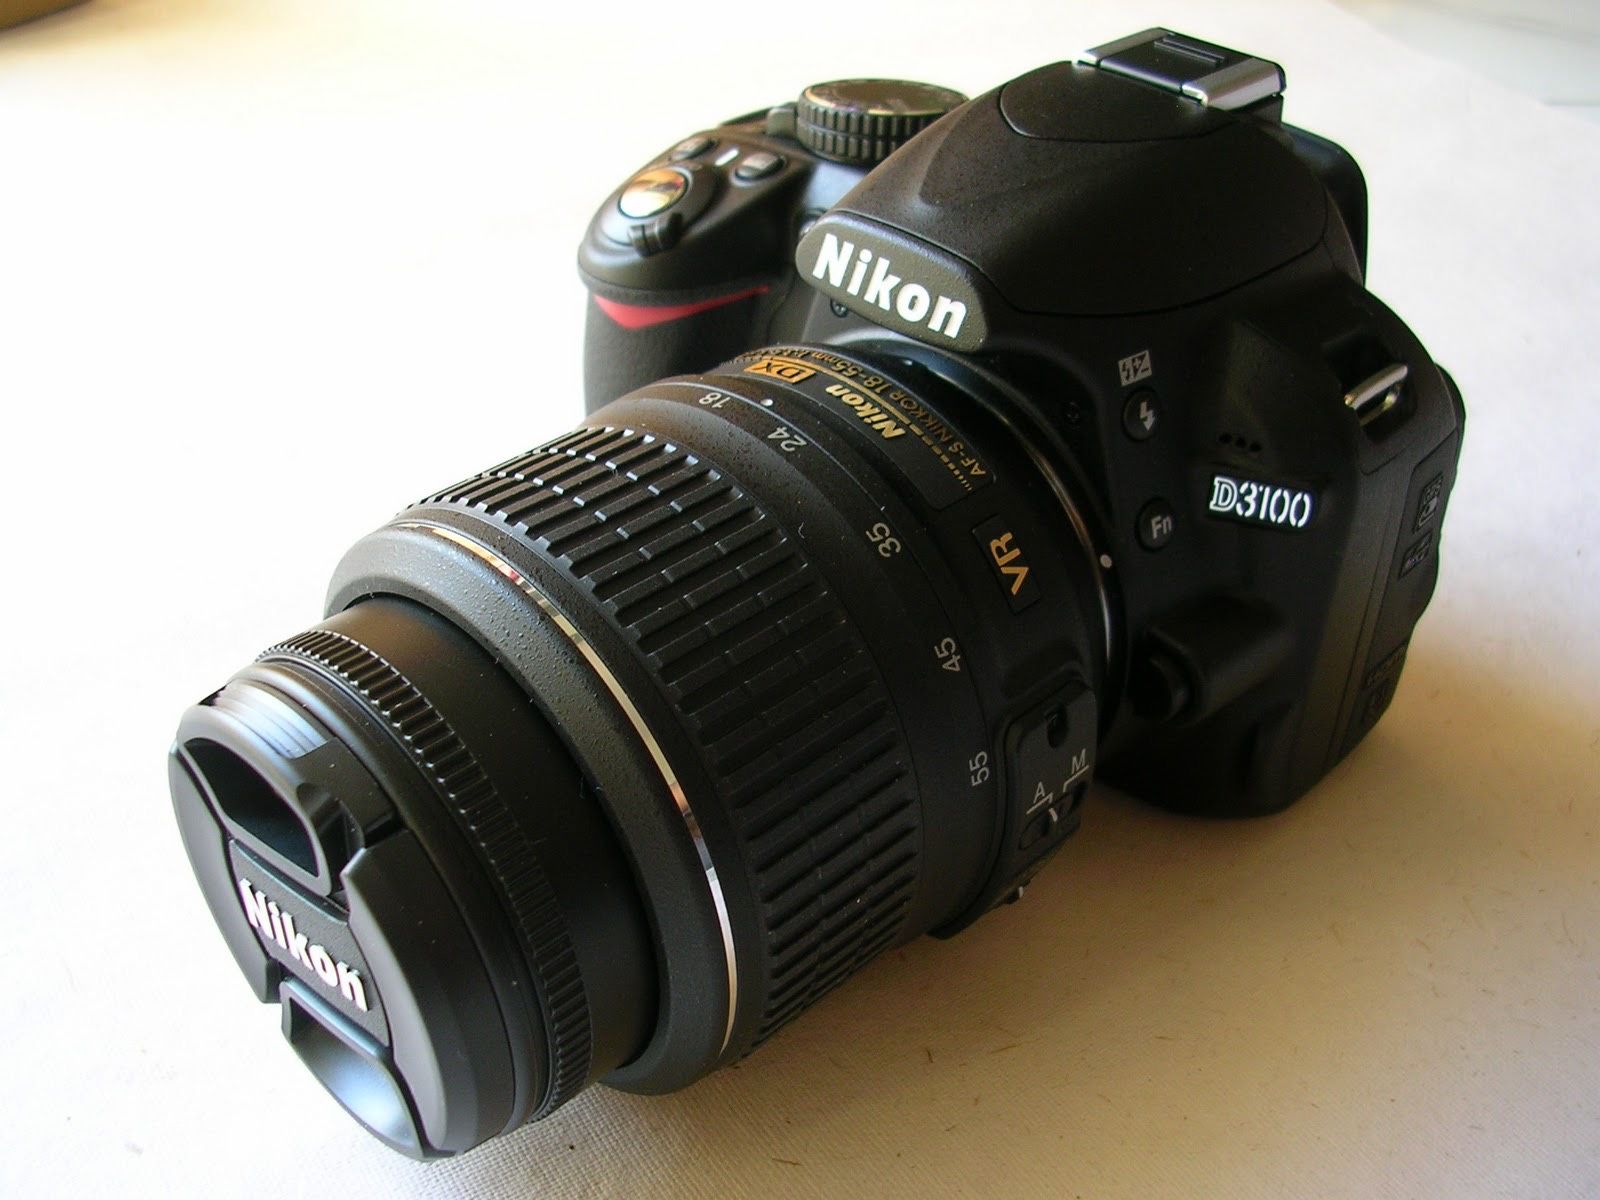 Nikon D3100 DSLR with 18-55mm and 55-200mm lenses